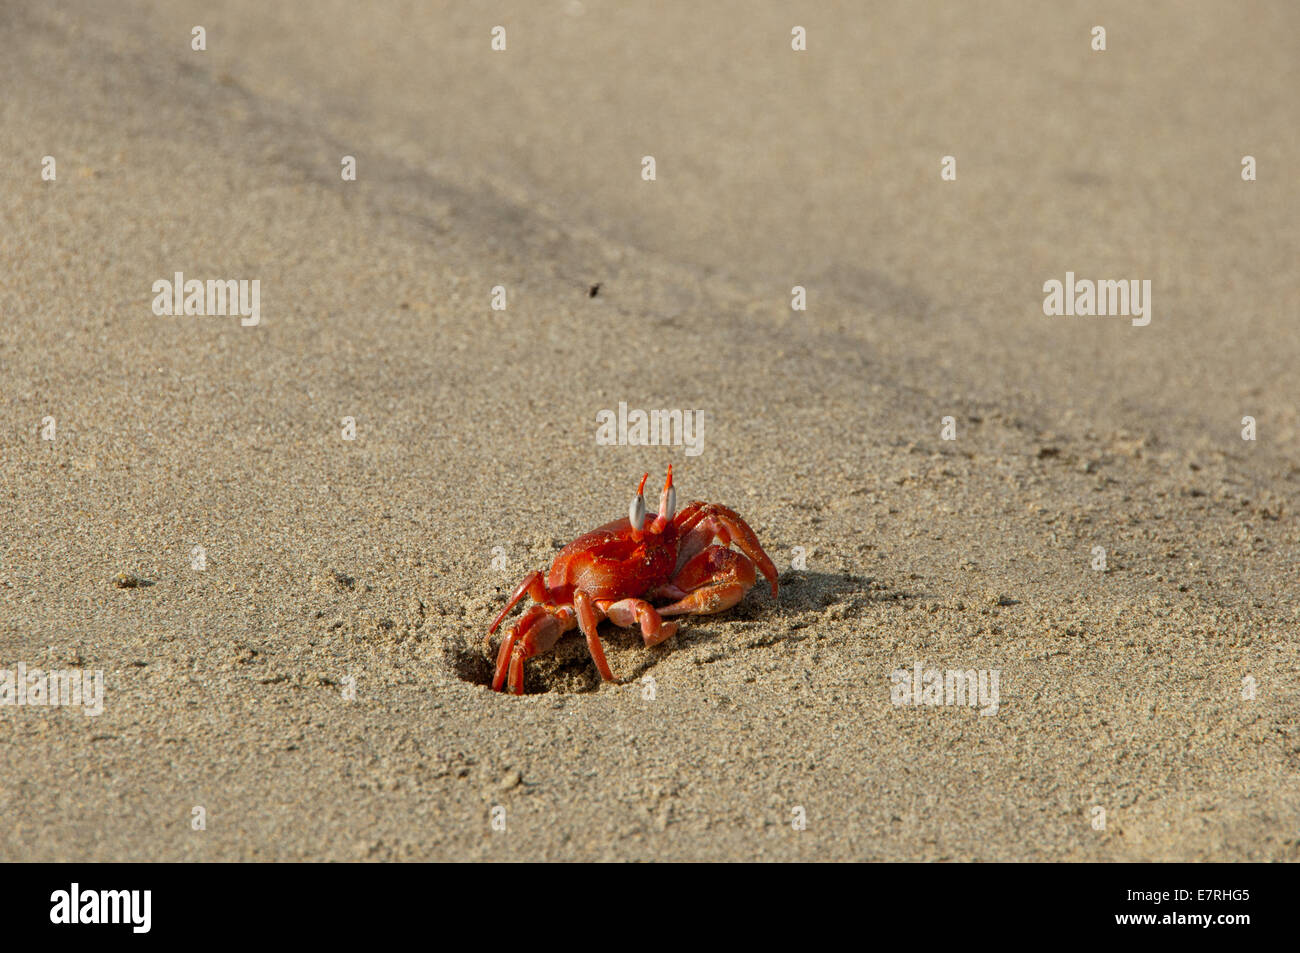 Painted Ghost Crab (Ocypode gaudichaudii) emerges from Hole in Sand Stock Photo